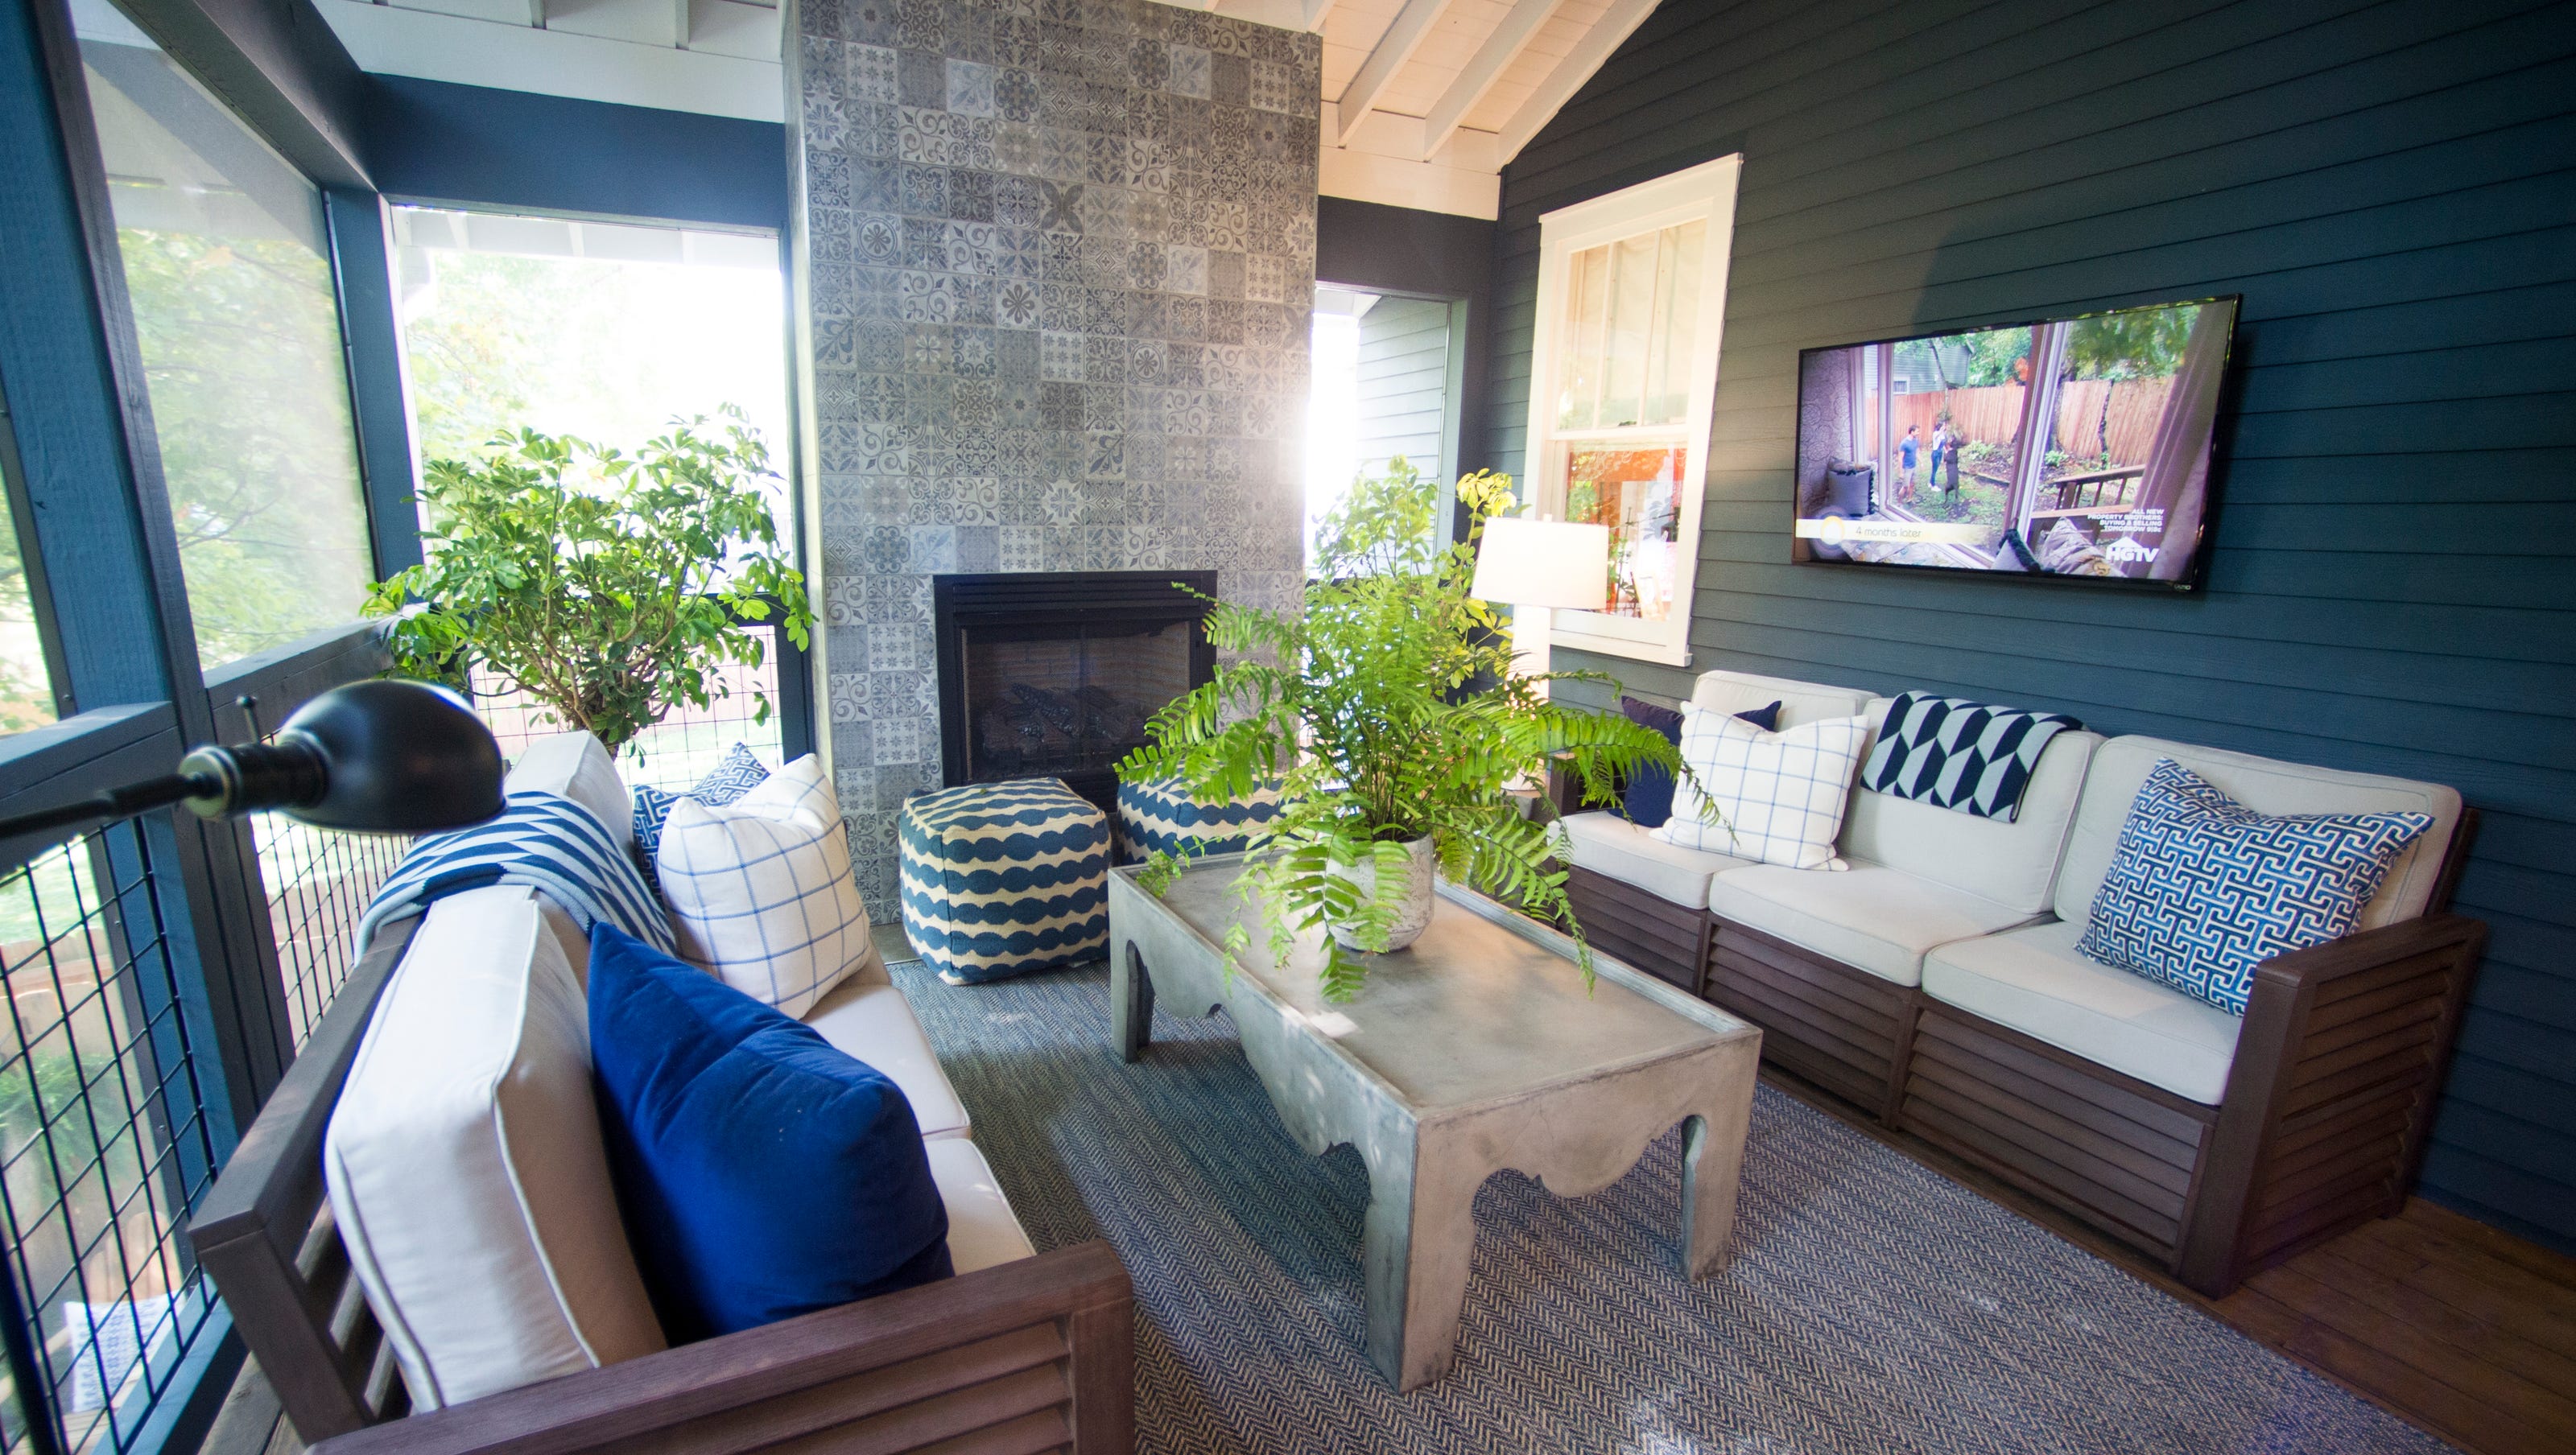 HGTV Urban Oasis giveaway home sports renovations, Tennessee flair